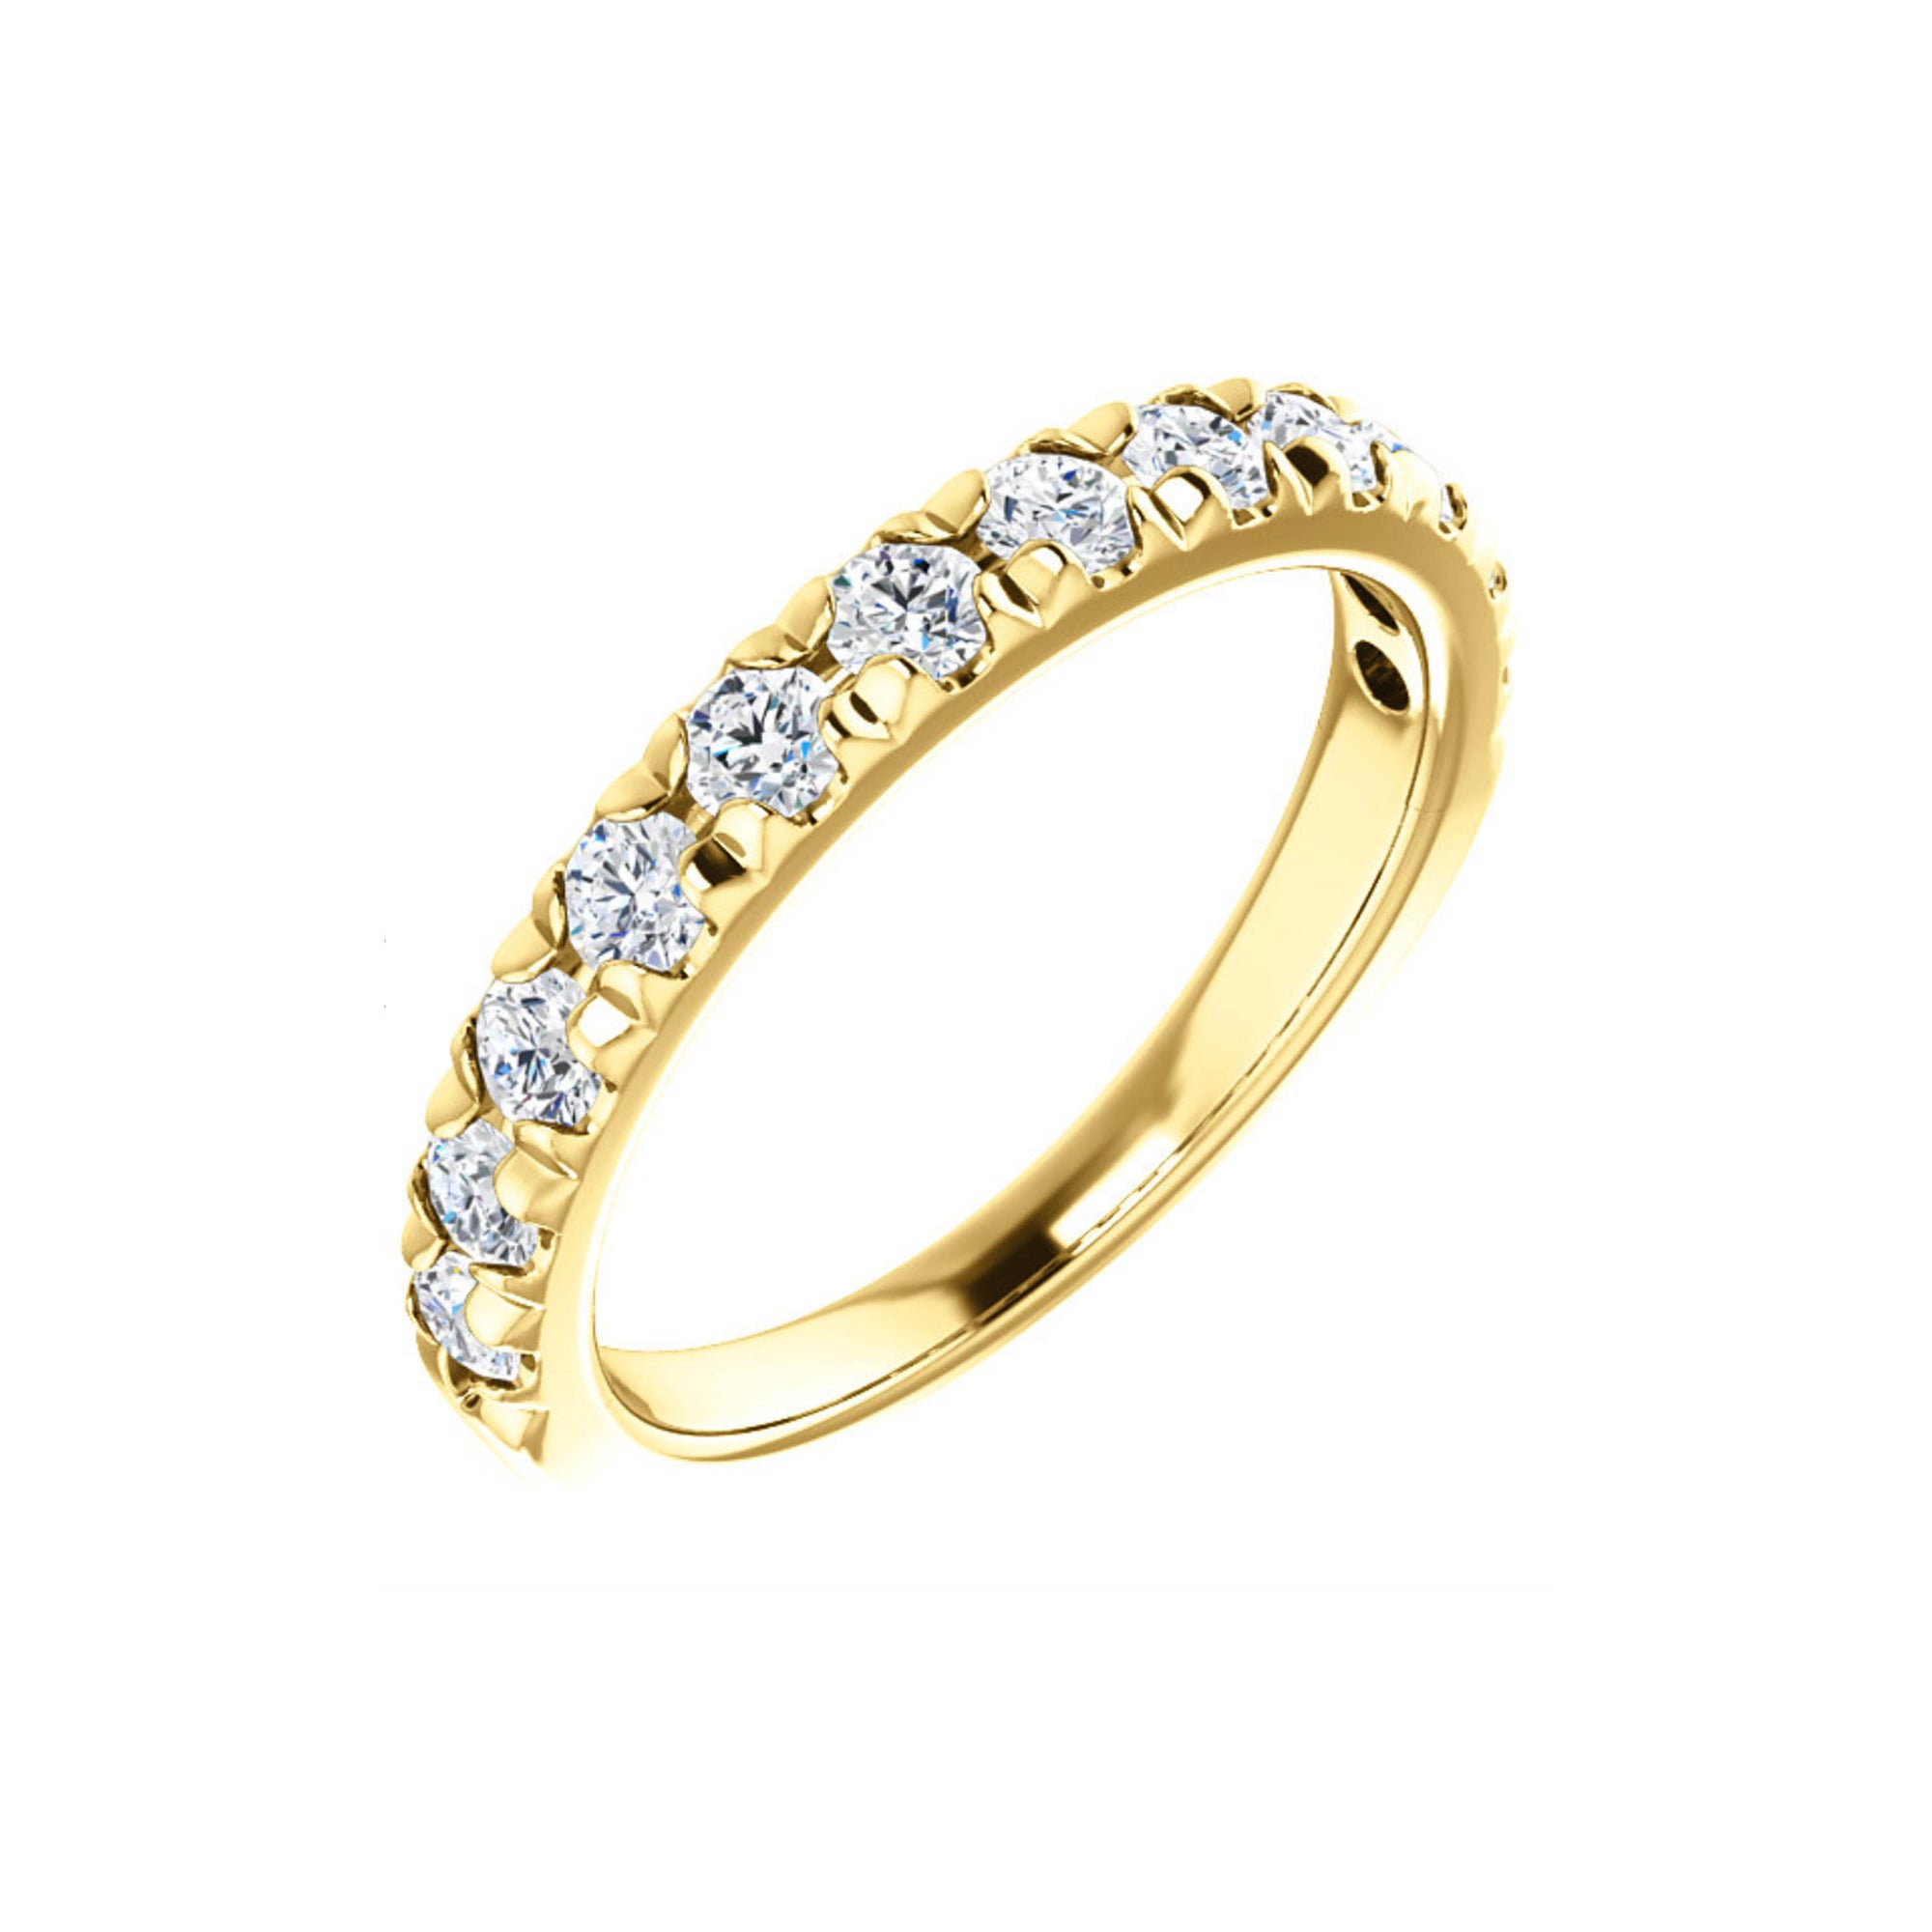 French Set Diamond Anniversary Stack Band in White, Yellow or Rose Gold - Talisman Collection Fine Jewelers